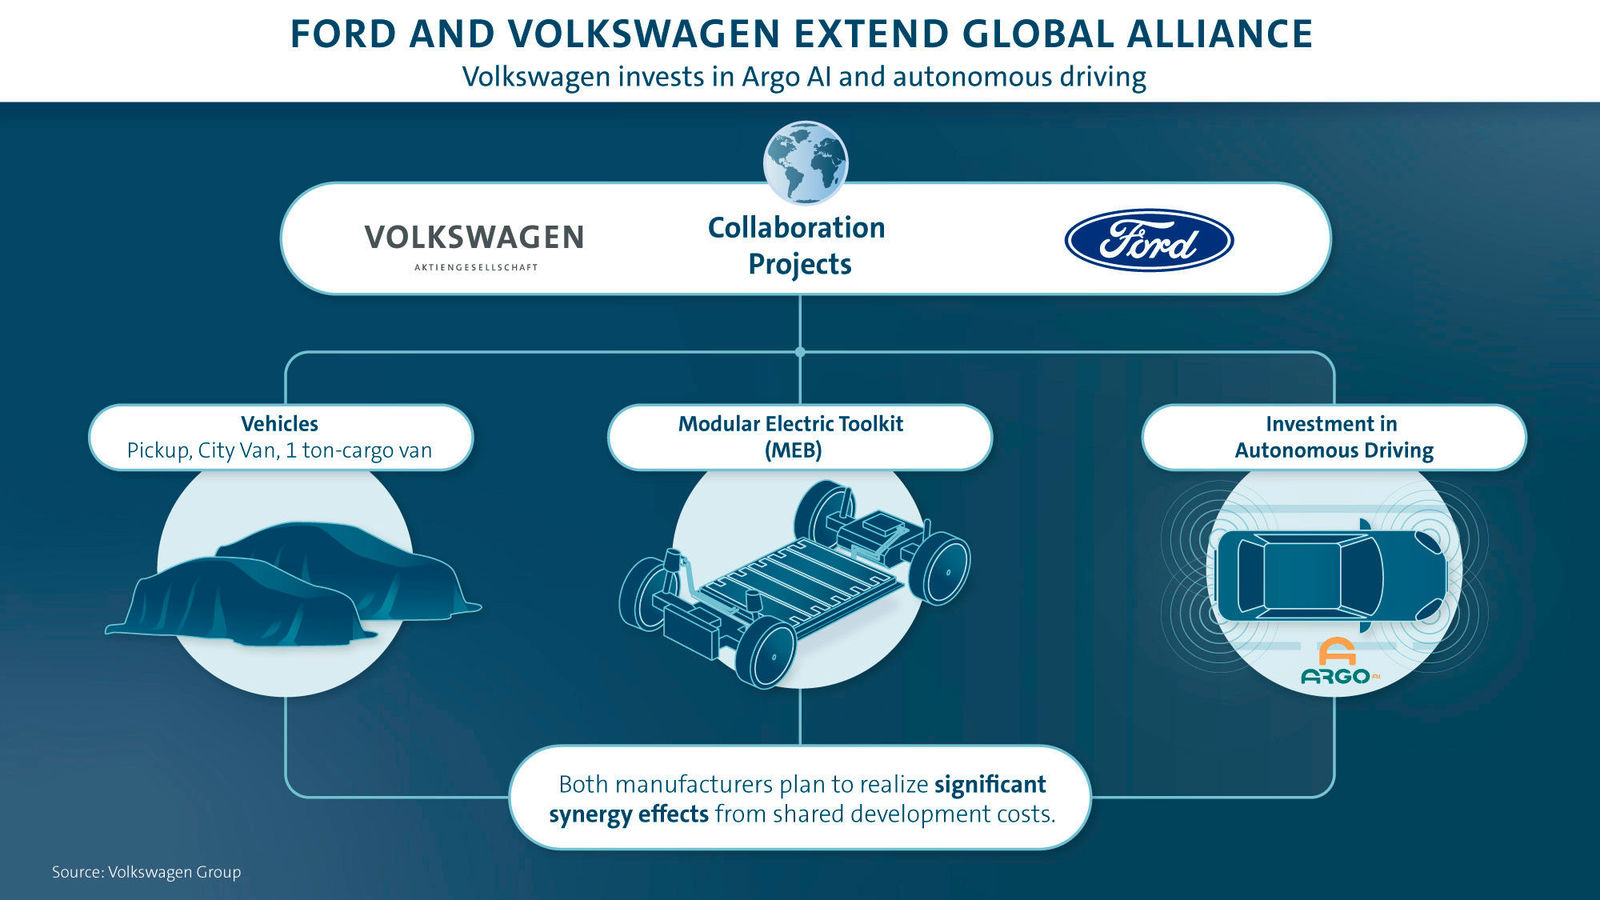 Ford, Volkswagen Sign Agreements for Joint Projects On Commercial Vehicles, Electrification, Autonomous Driving